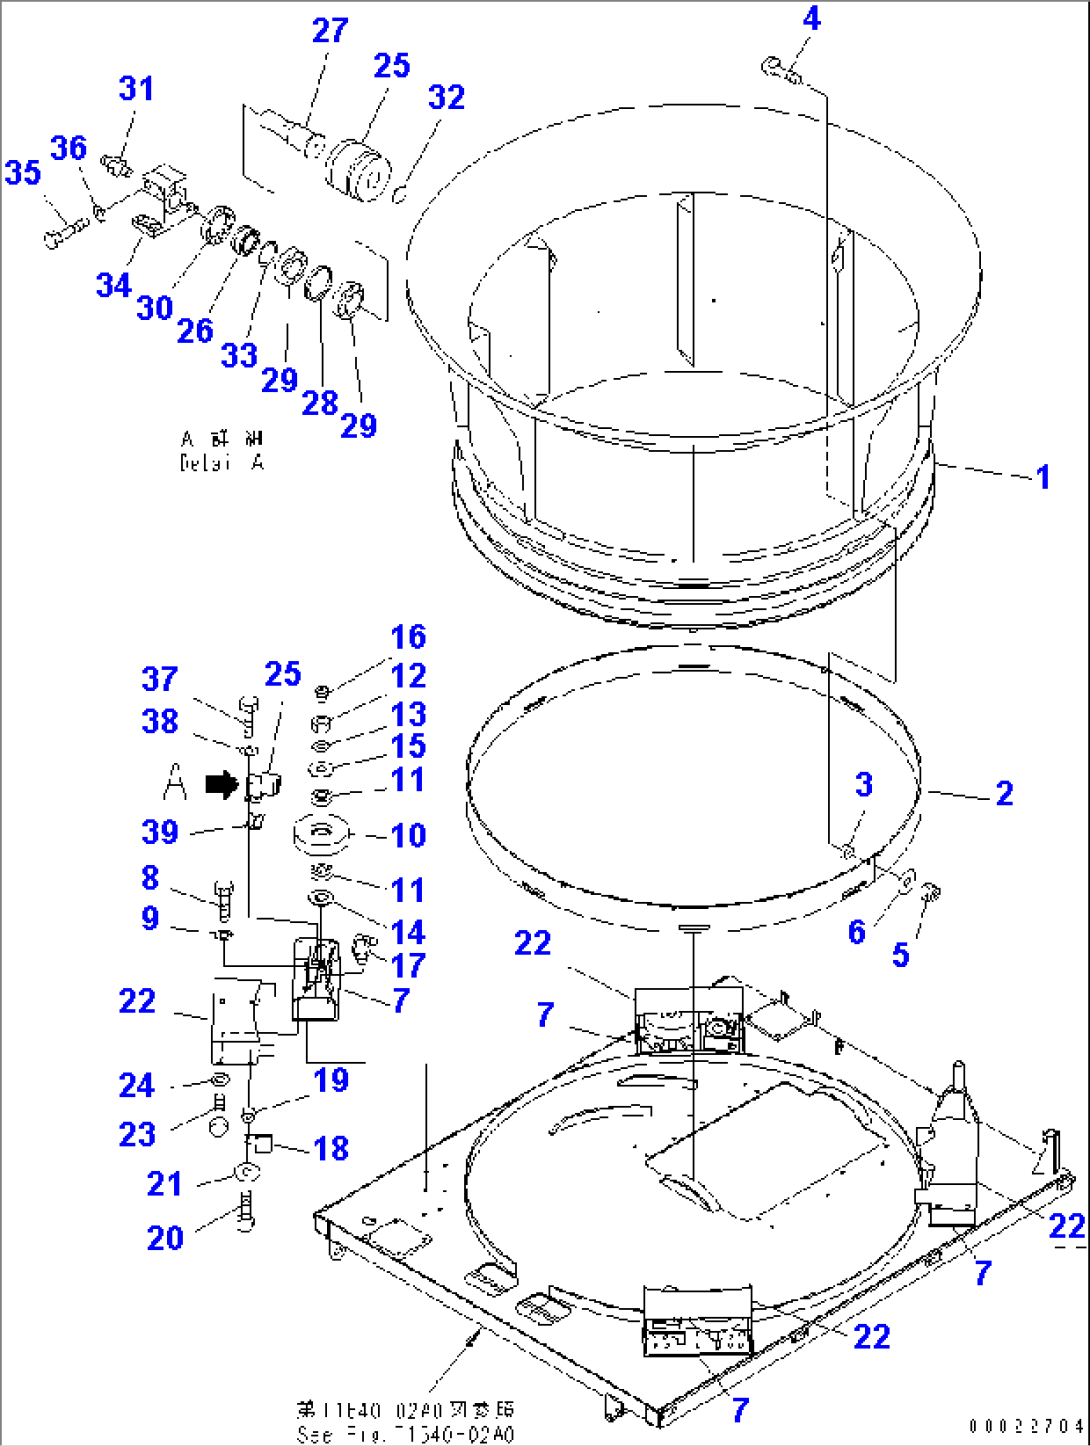 HAMMER MILL AND TUB (TUB AND ROLLER)(#1310-)